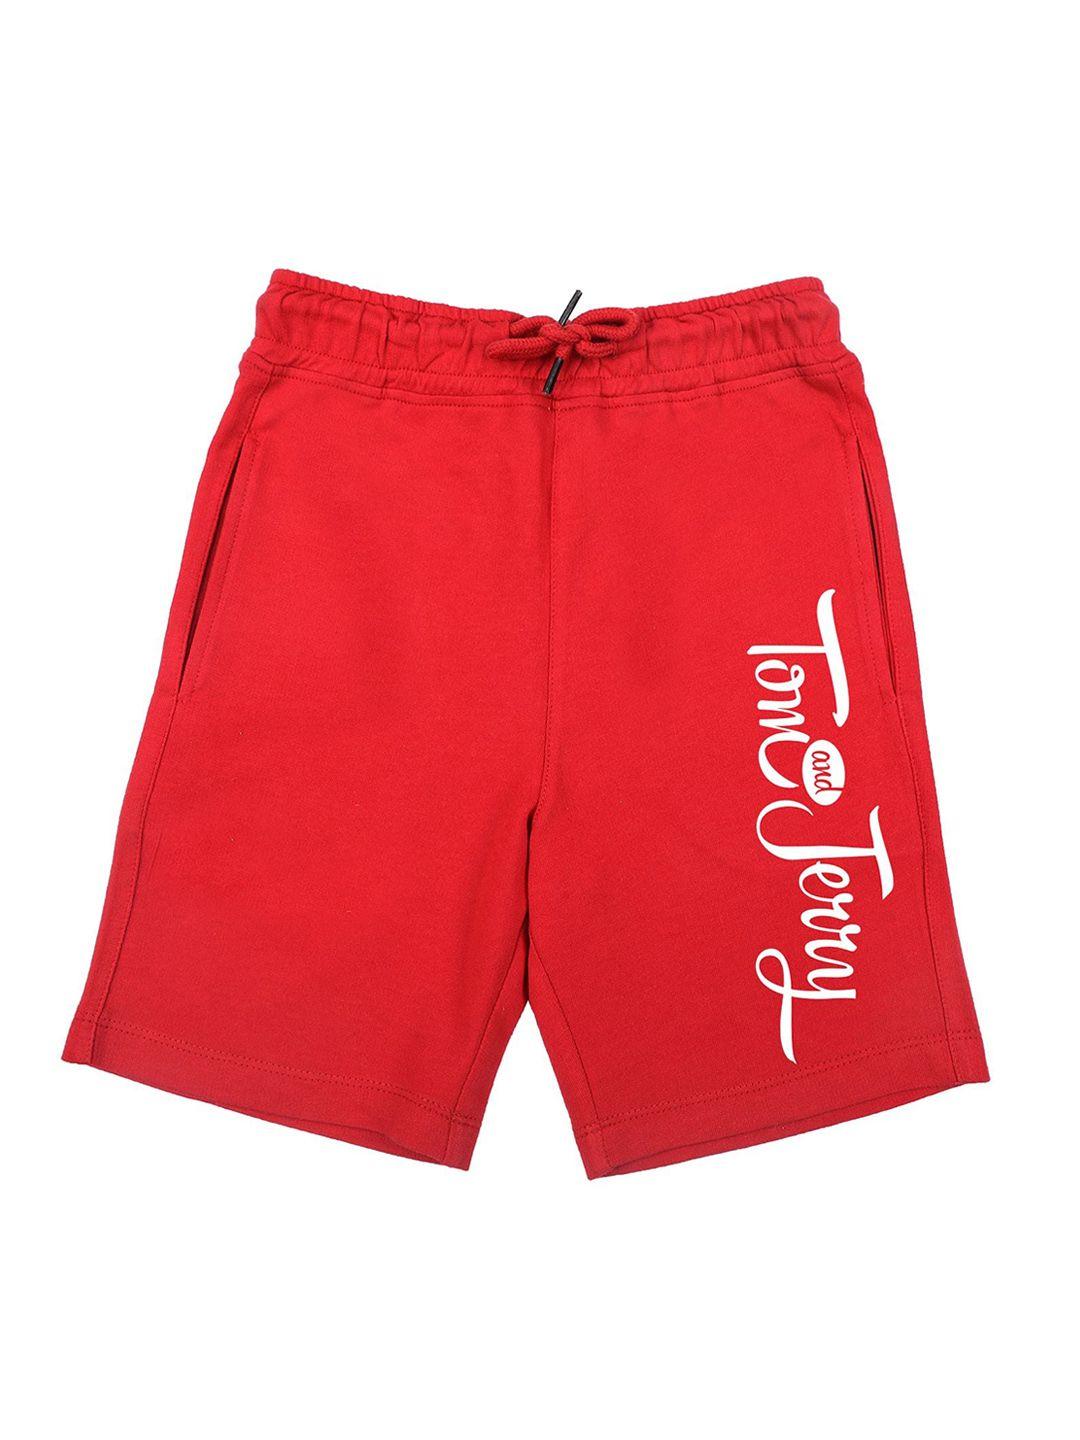 tom-&-jerry-by-wear-your-mind-boys-red-typography-printed-tom-&-jerry-shorts